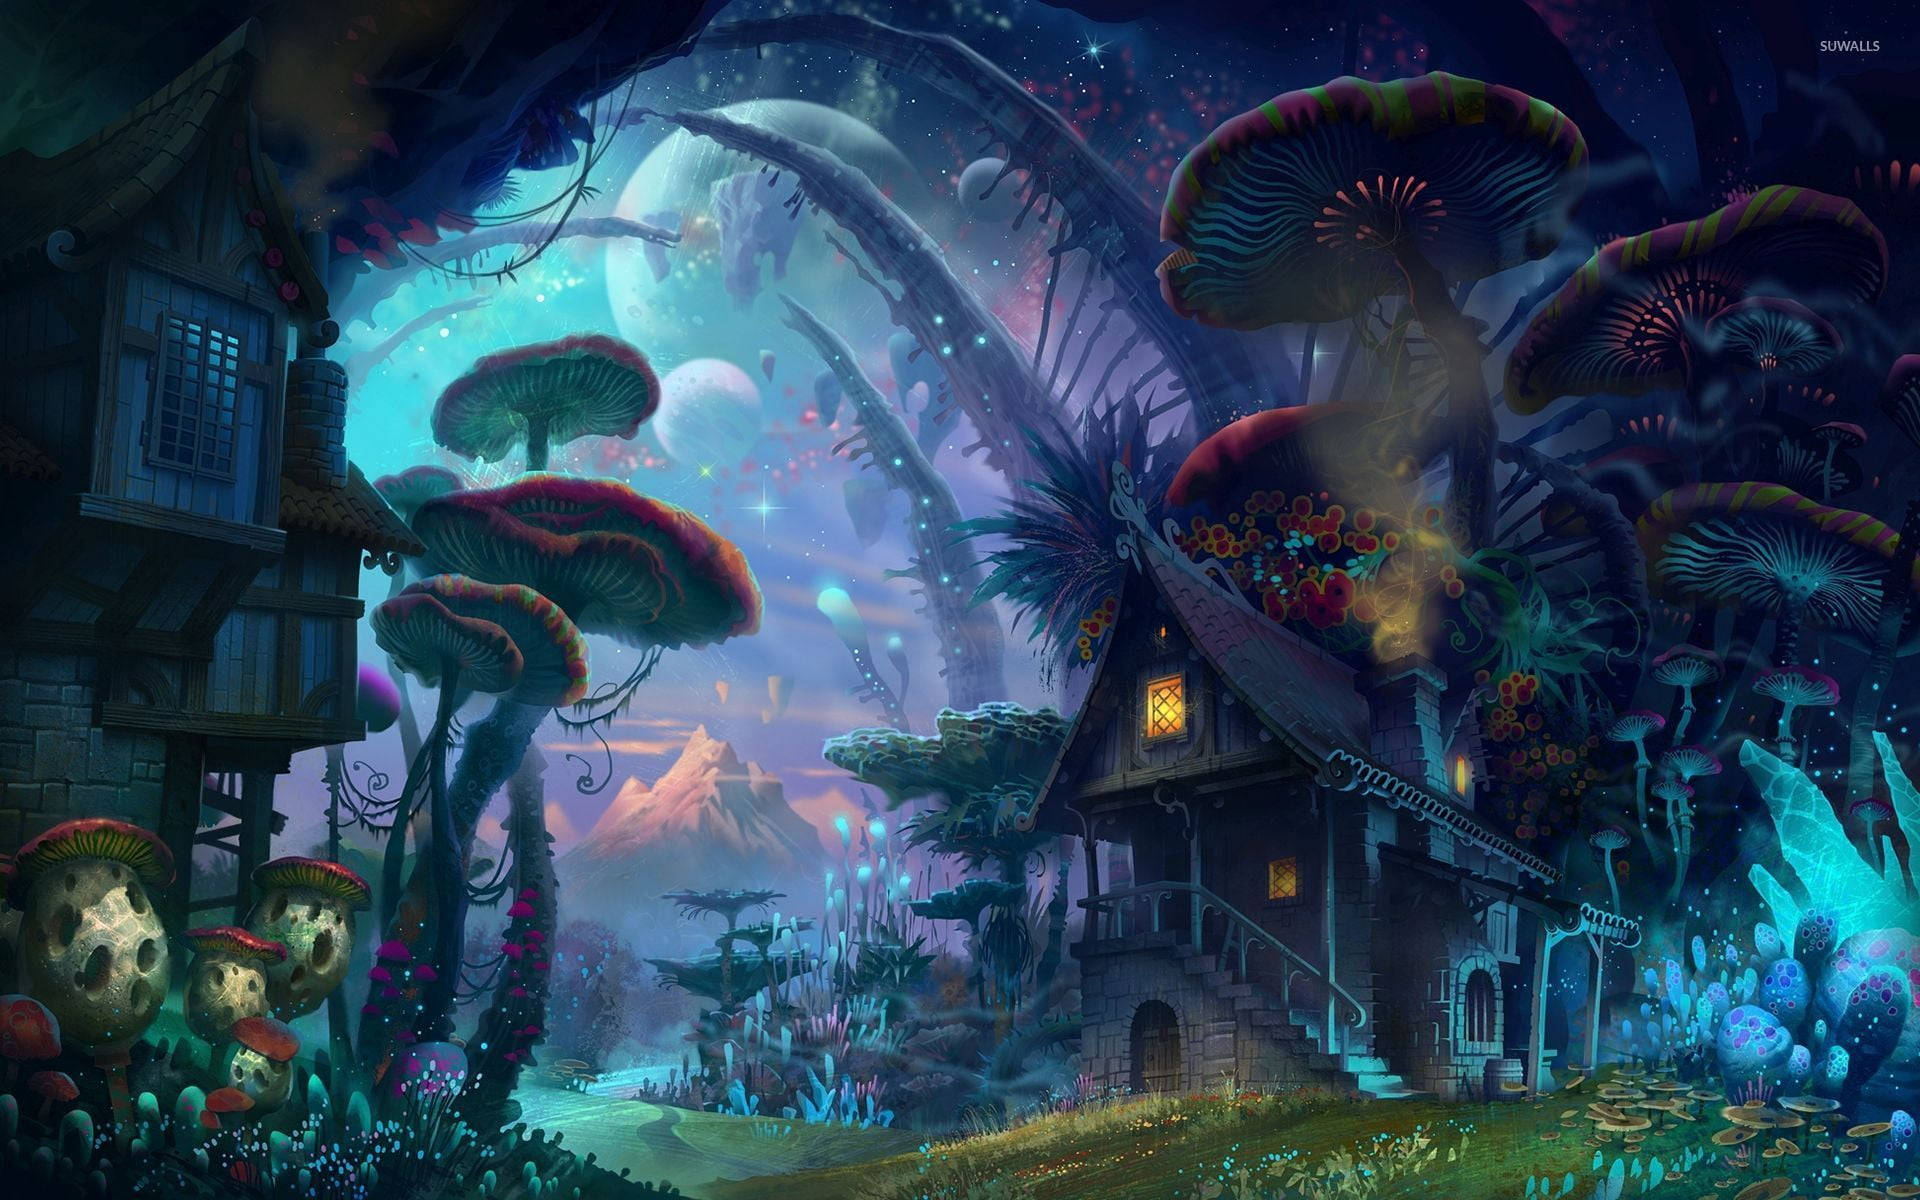 Feel the trippy vibes as you explore the world of psychedelic mushroom Wallpaper